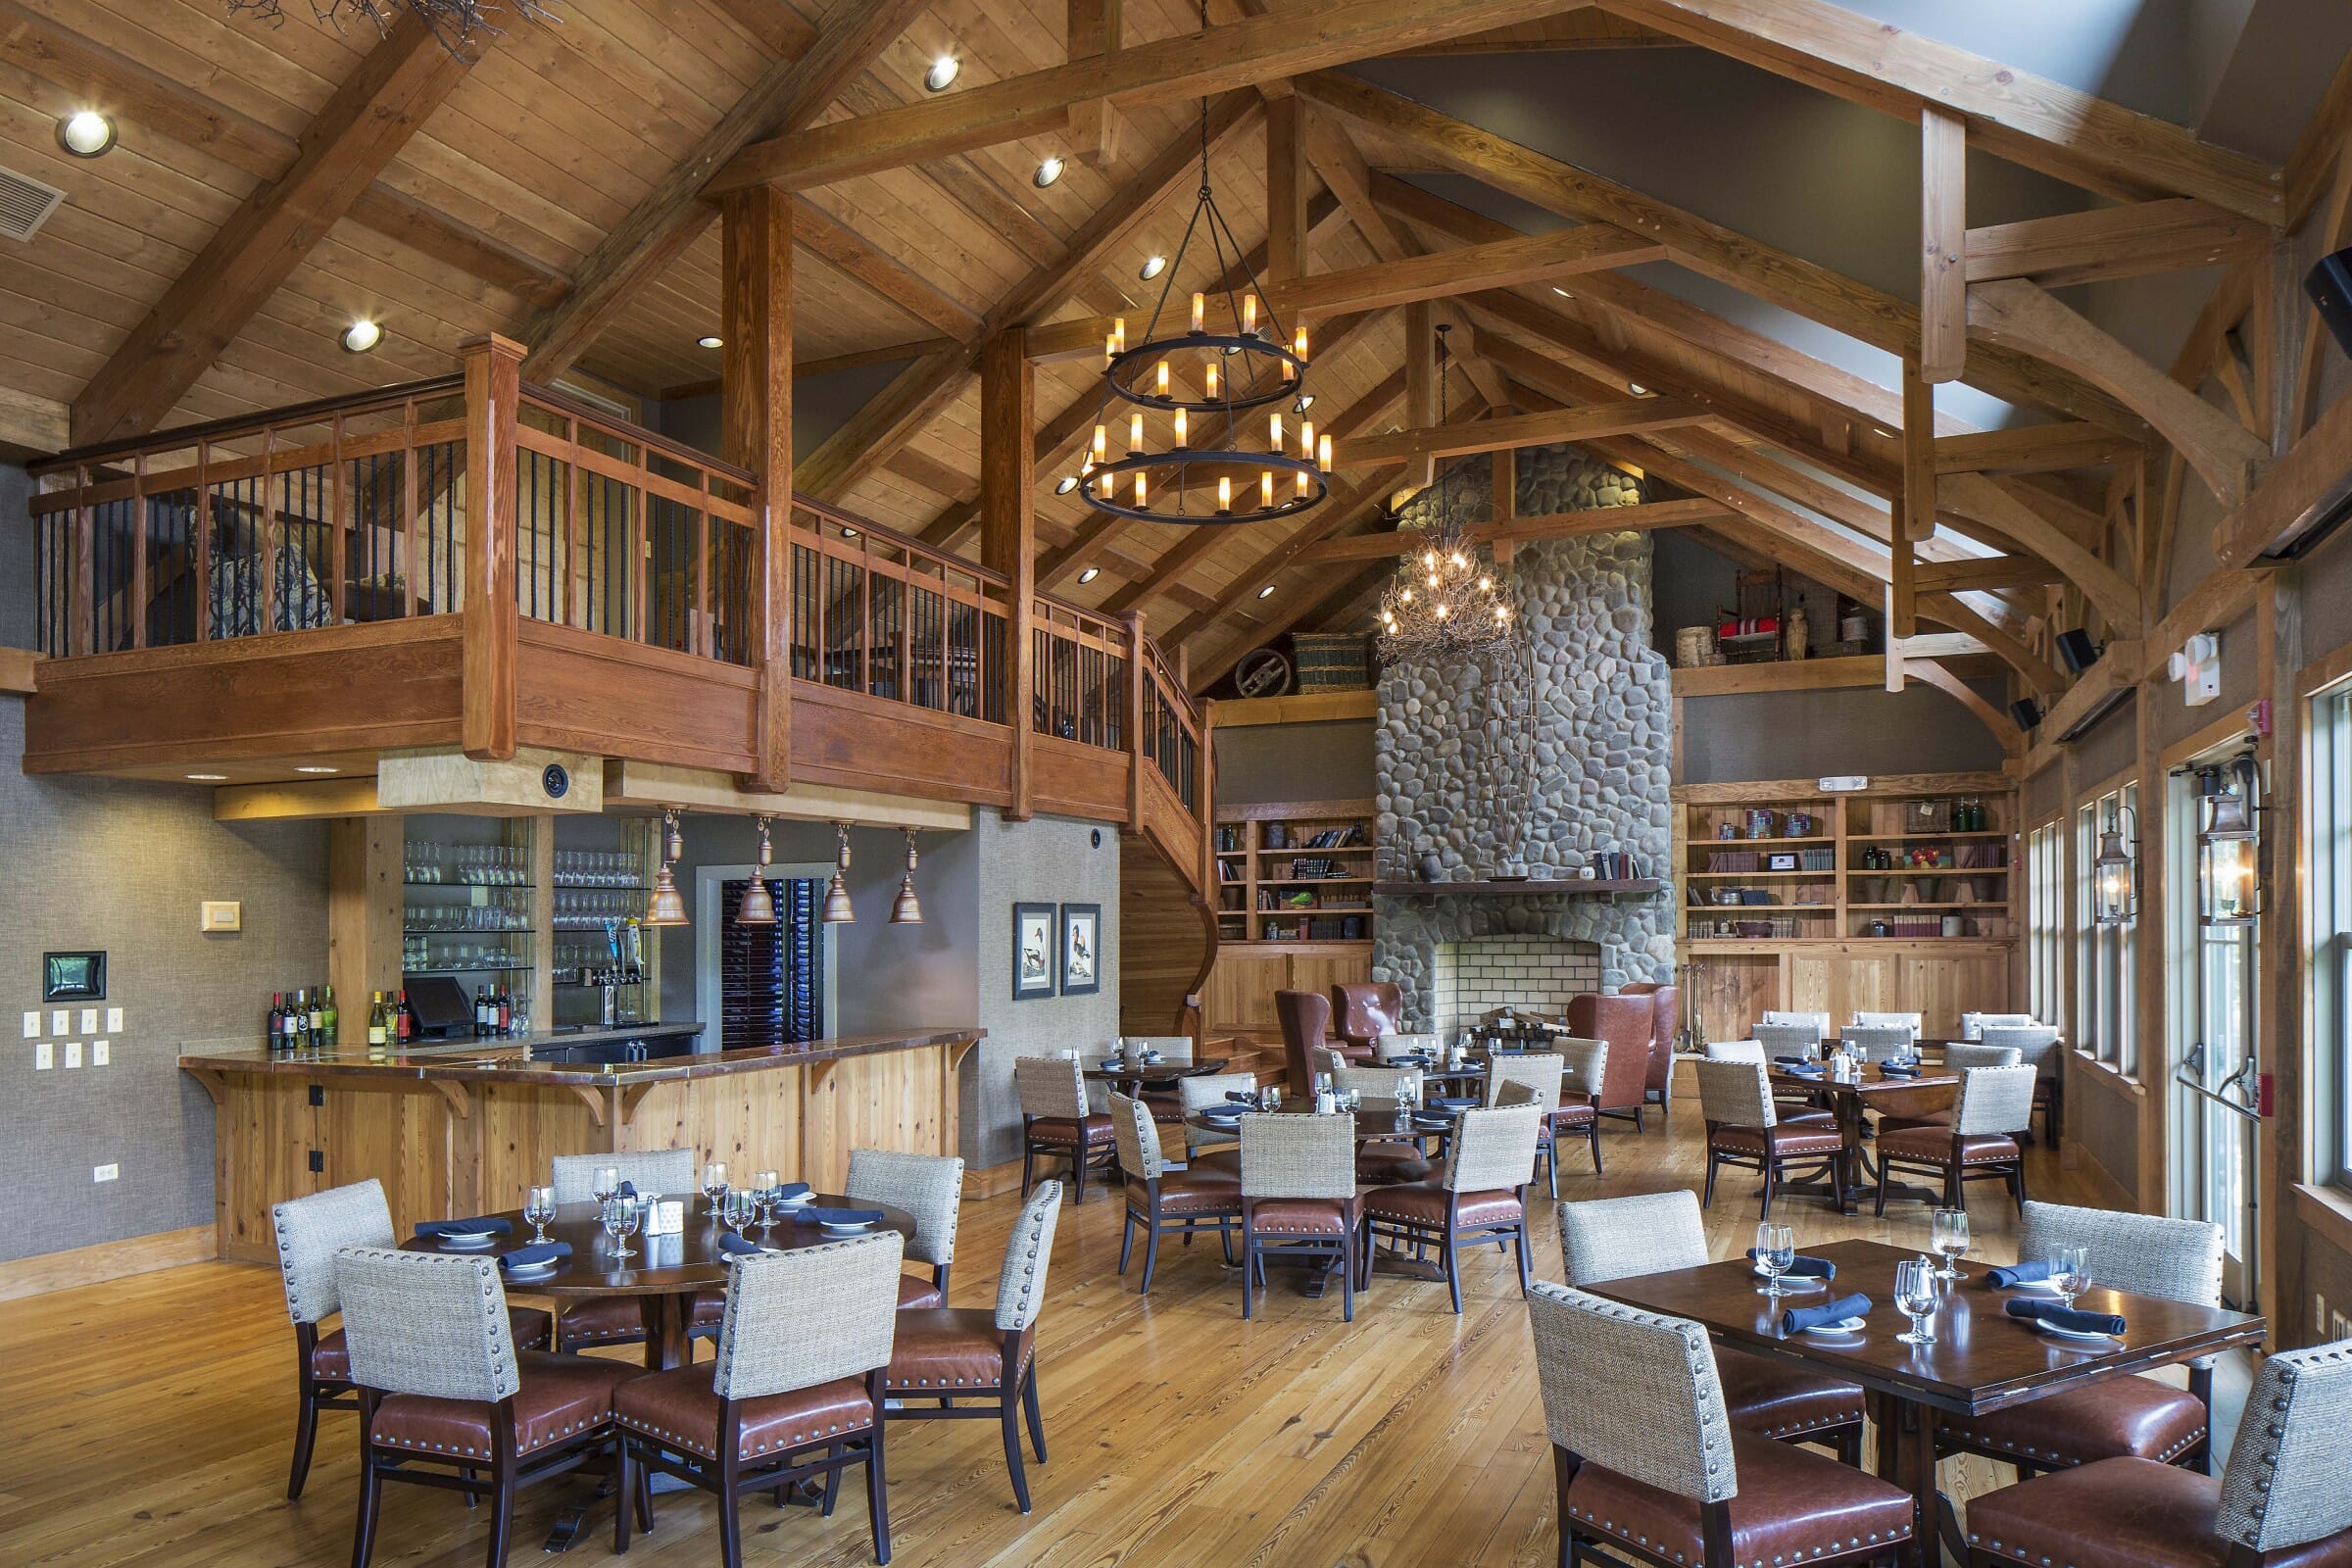 Interior of the South River Golf Club dining room and event space that features Timber Trusses, a Cathedral ceiling, and a tall stone fireplace.